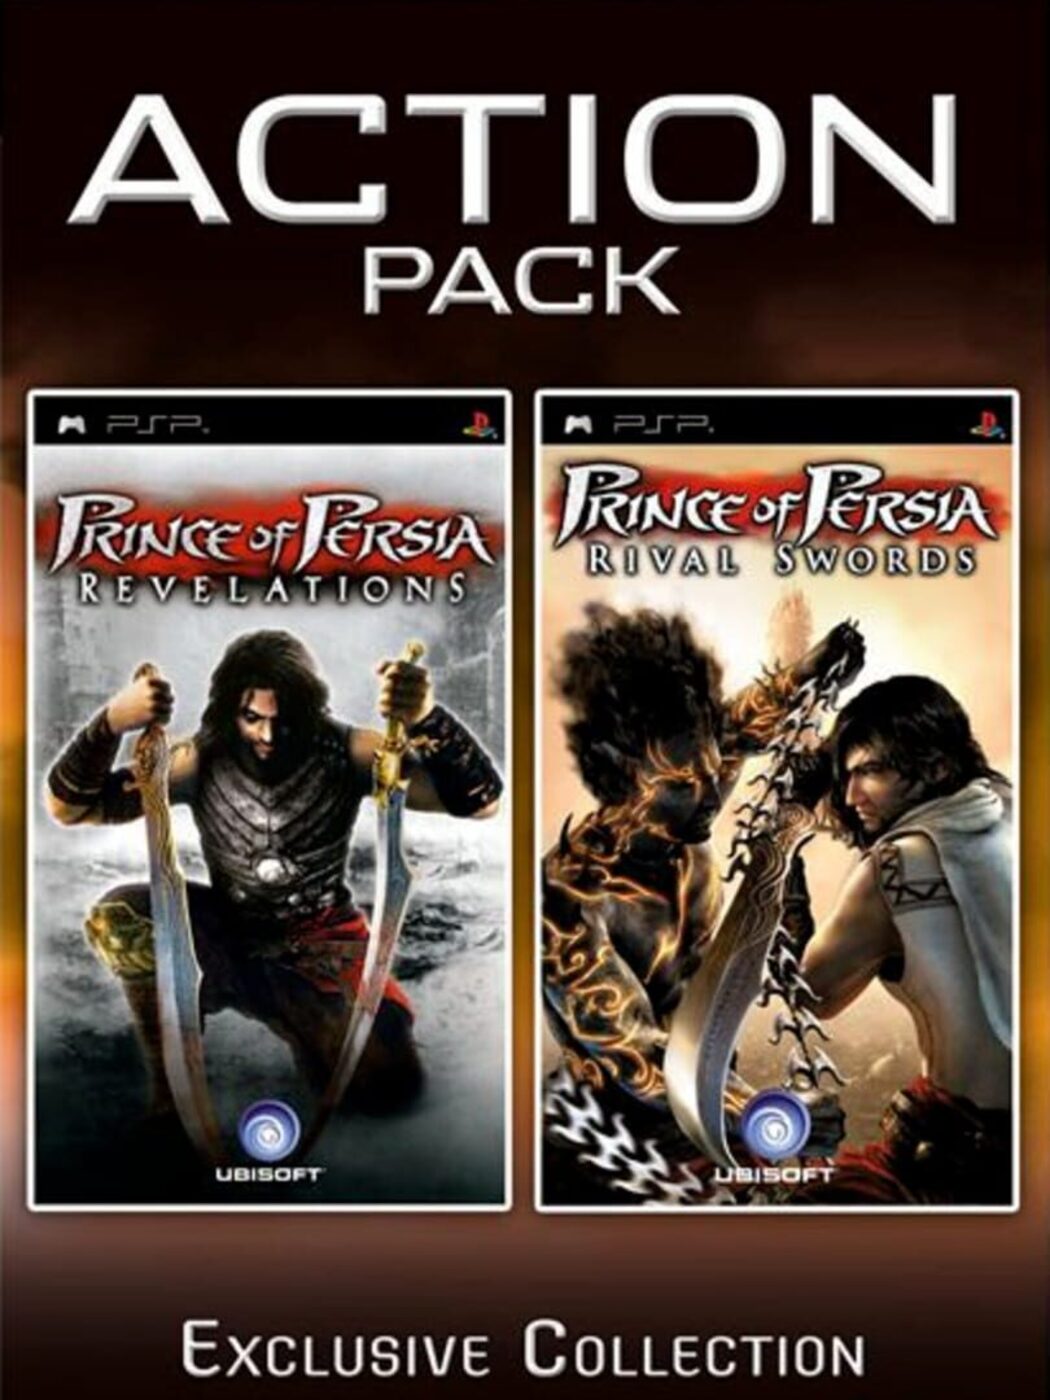 Find the best price on Prince of Persia: Revelations (PSP)